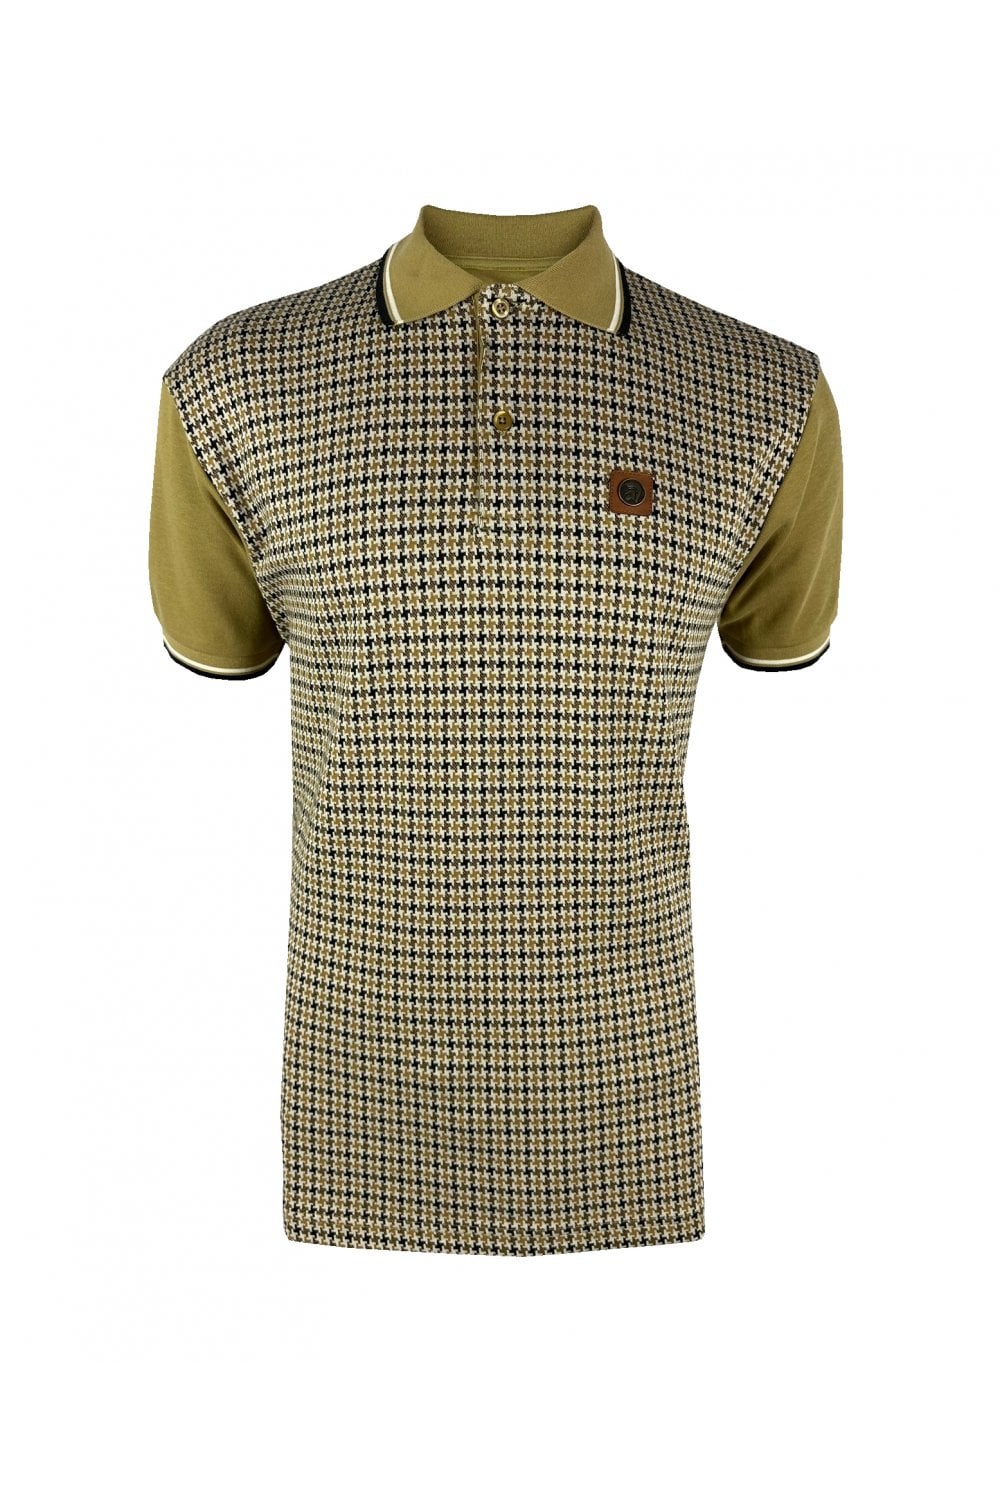 Trojan jacquard houndstooth panel polo in Camel TR/8871